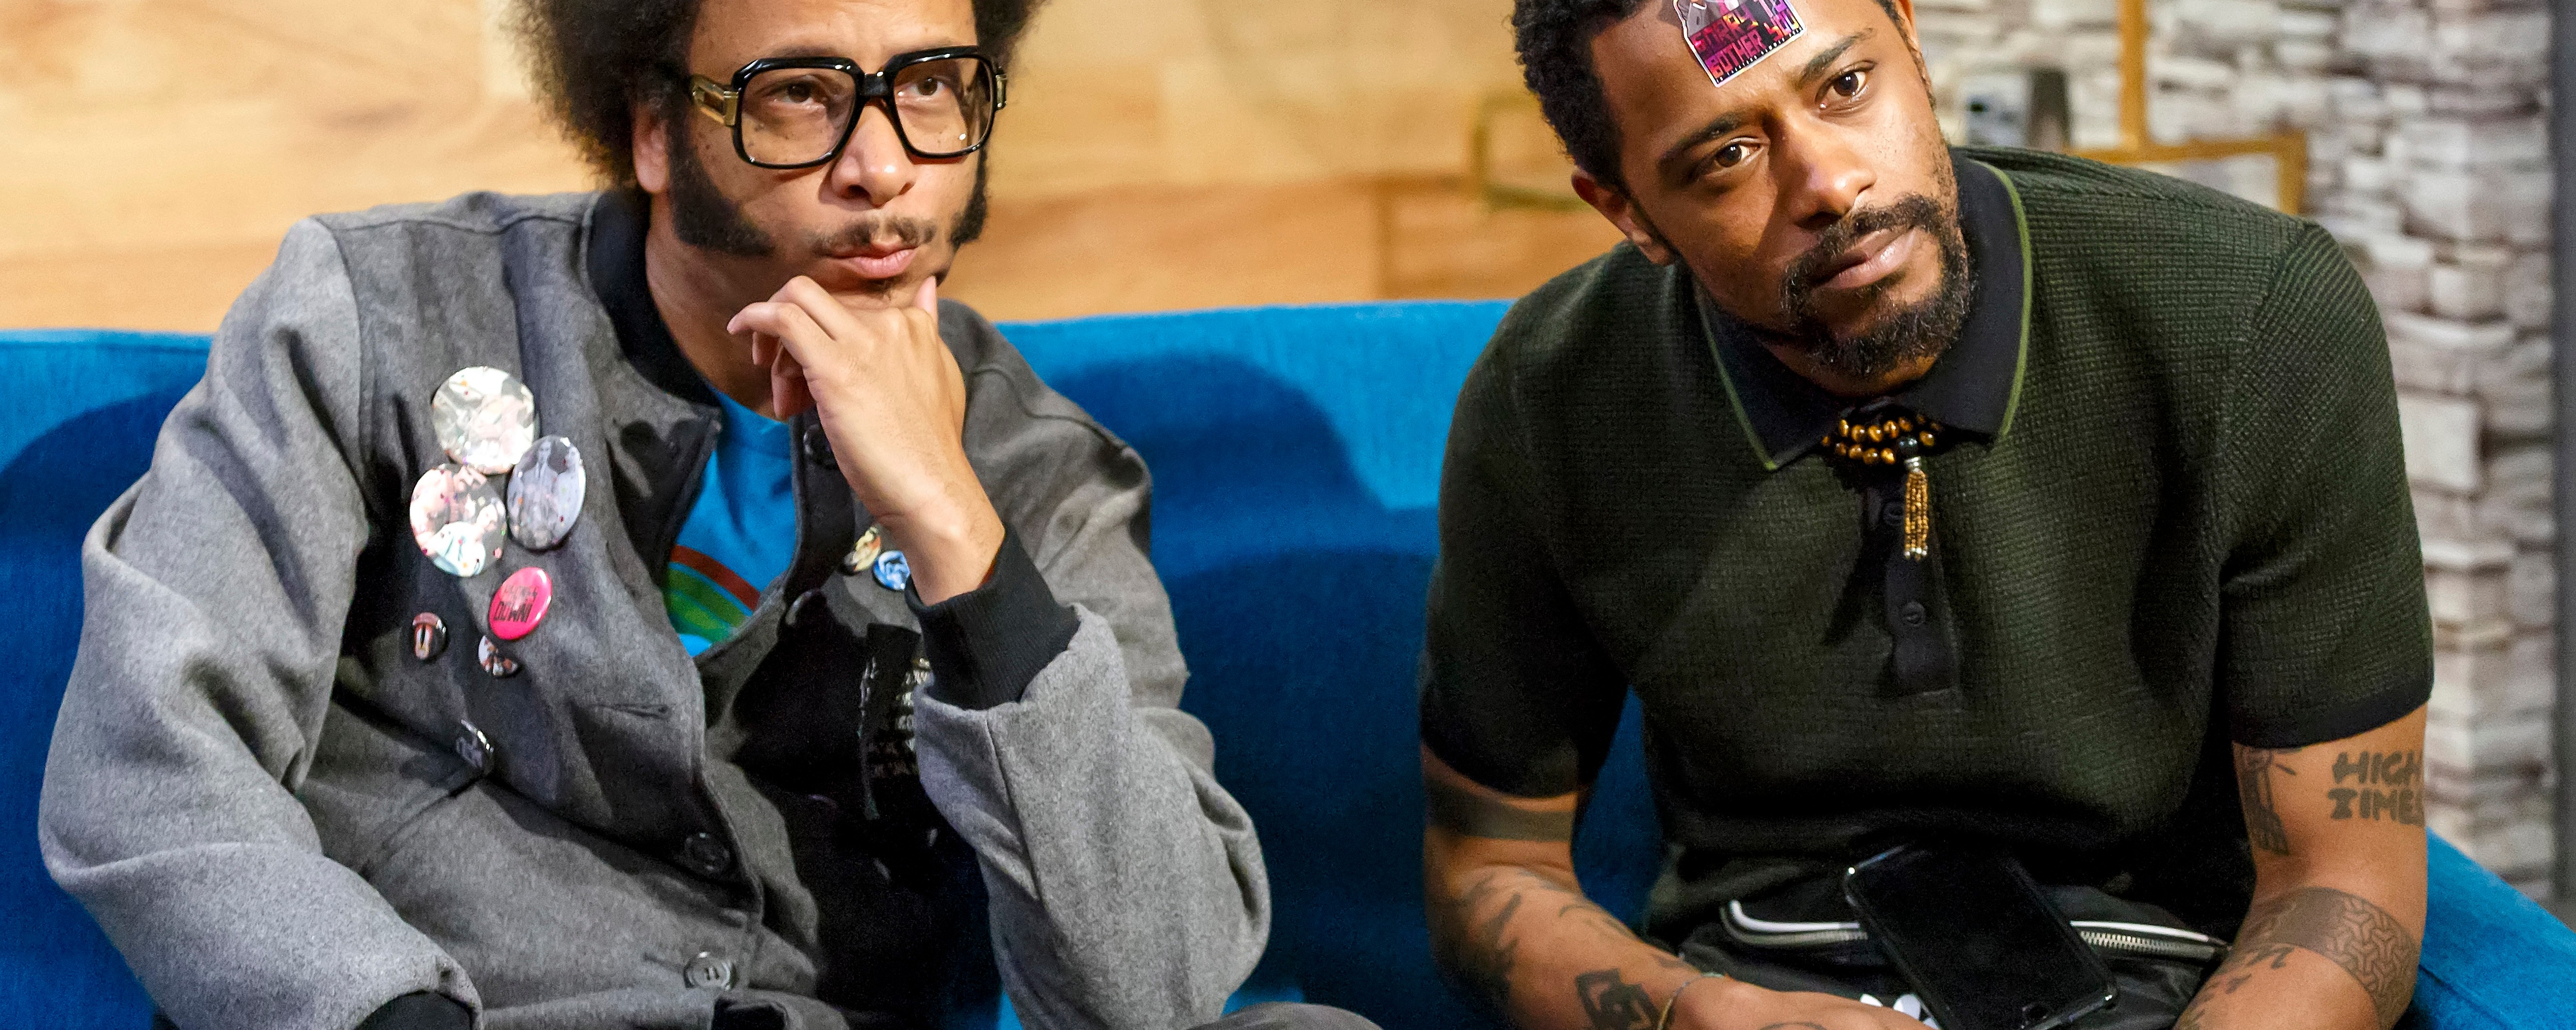 Boots Riley and Lakeith Stanfield Aren't Really 'Sorry to Bother You'